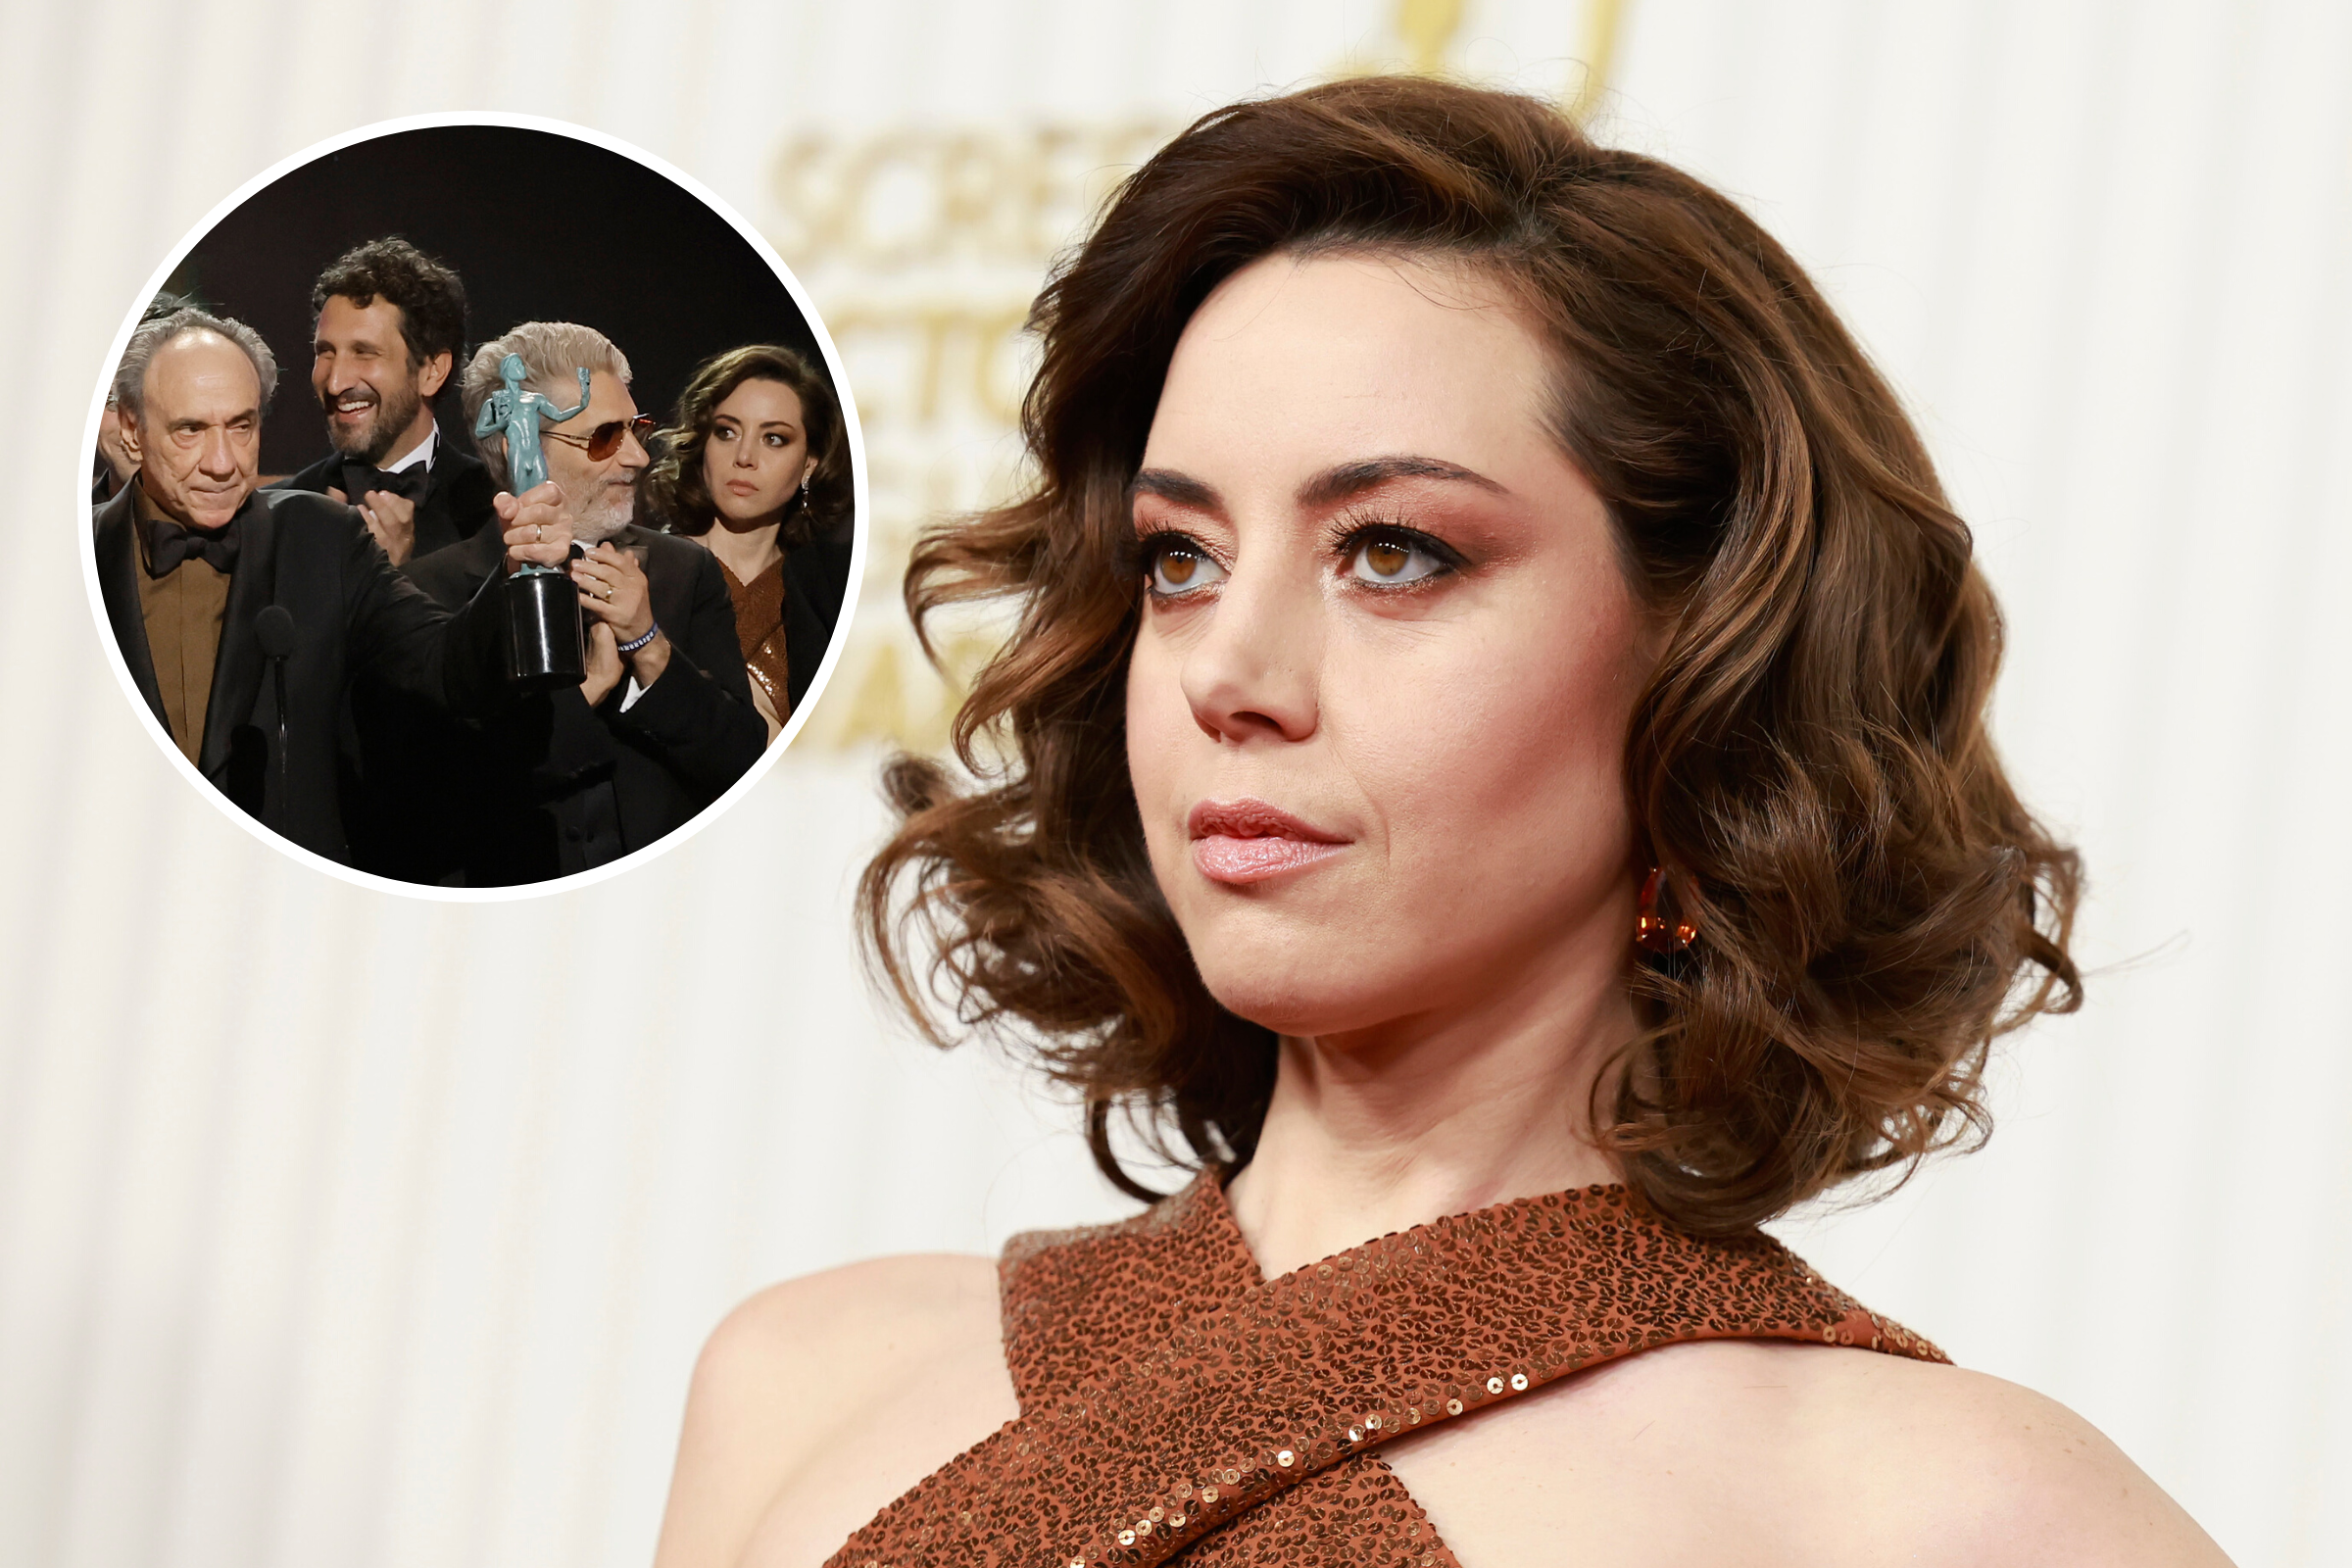 Aubrey Plaza joins the cast of The White Lotus for season 2